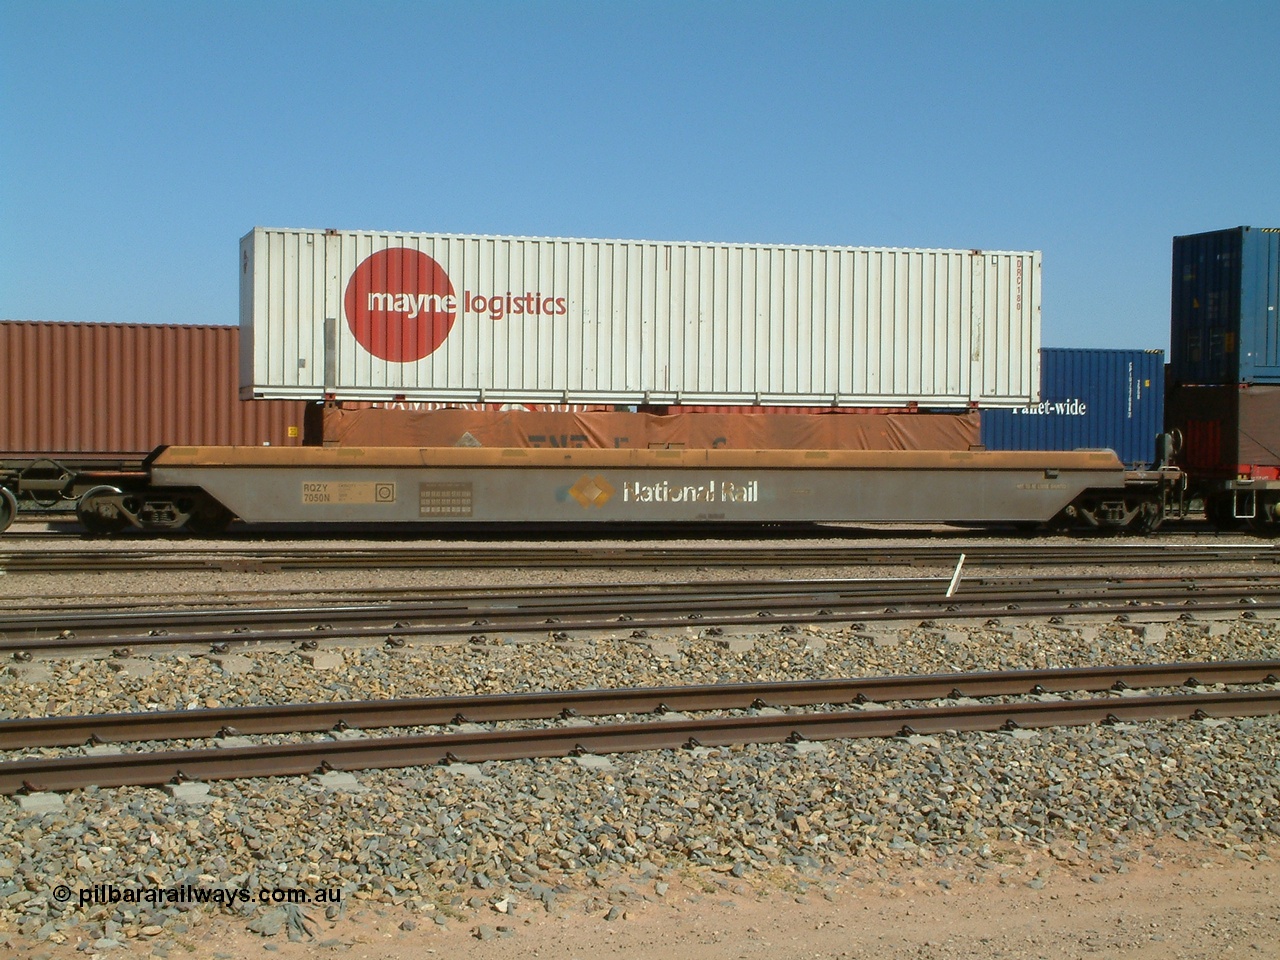 030404 104443
Port Augusta, Spencer Junction yard, RQZY type five unit bar coupled well container waggon RQZY 7050 built as one of a batch of thirty two by Goninan NSW for National Rail, with a Mayne Logistics 48' box DRC 180 on top of a TNT tarped 40' half height unit. 4th April, 2003.
Keywords: RQZY-type;RQZY7050;1995-96/32-16;Goninan-NSW;